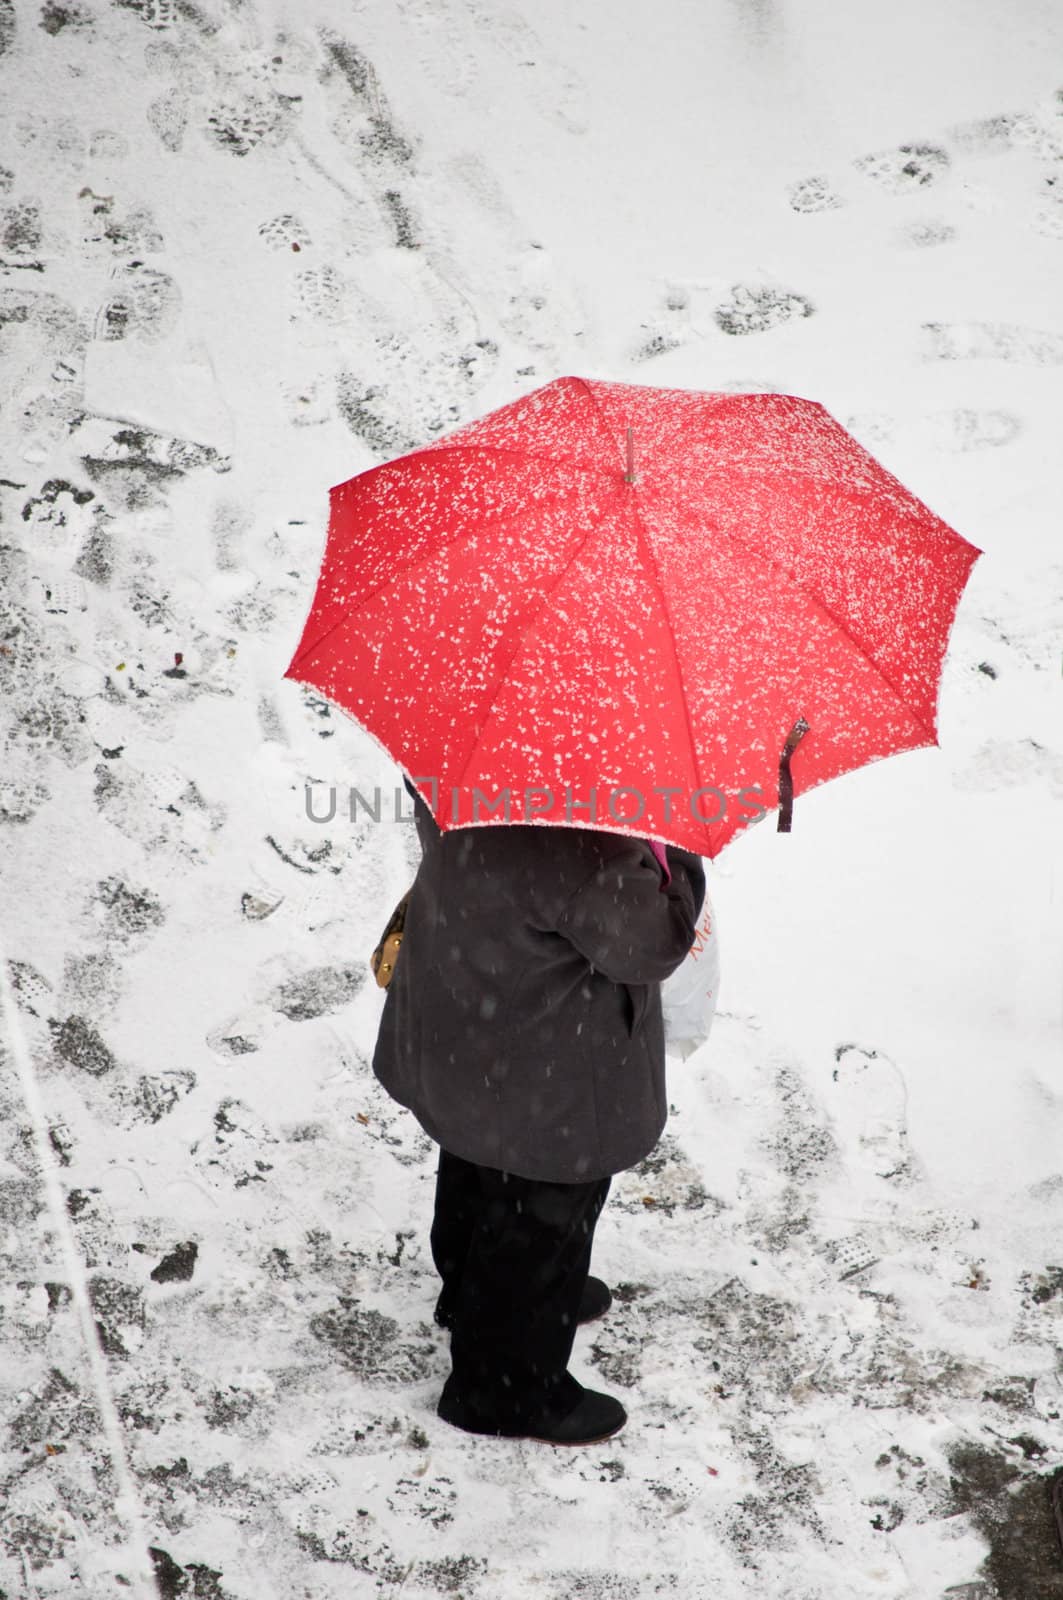 Woman on snowy day with red umbrella by sil